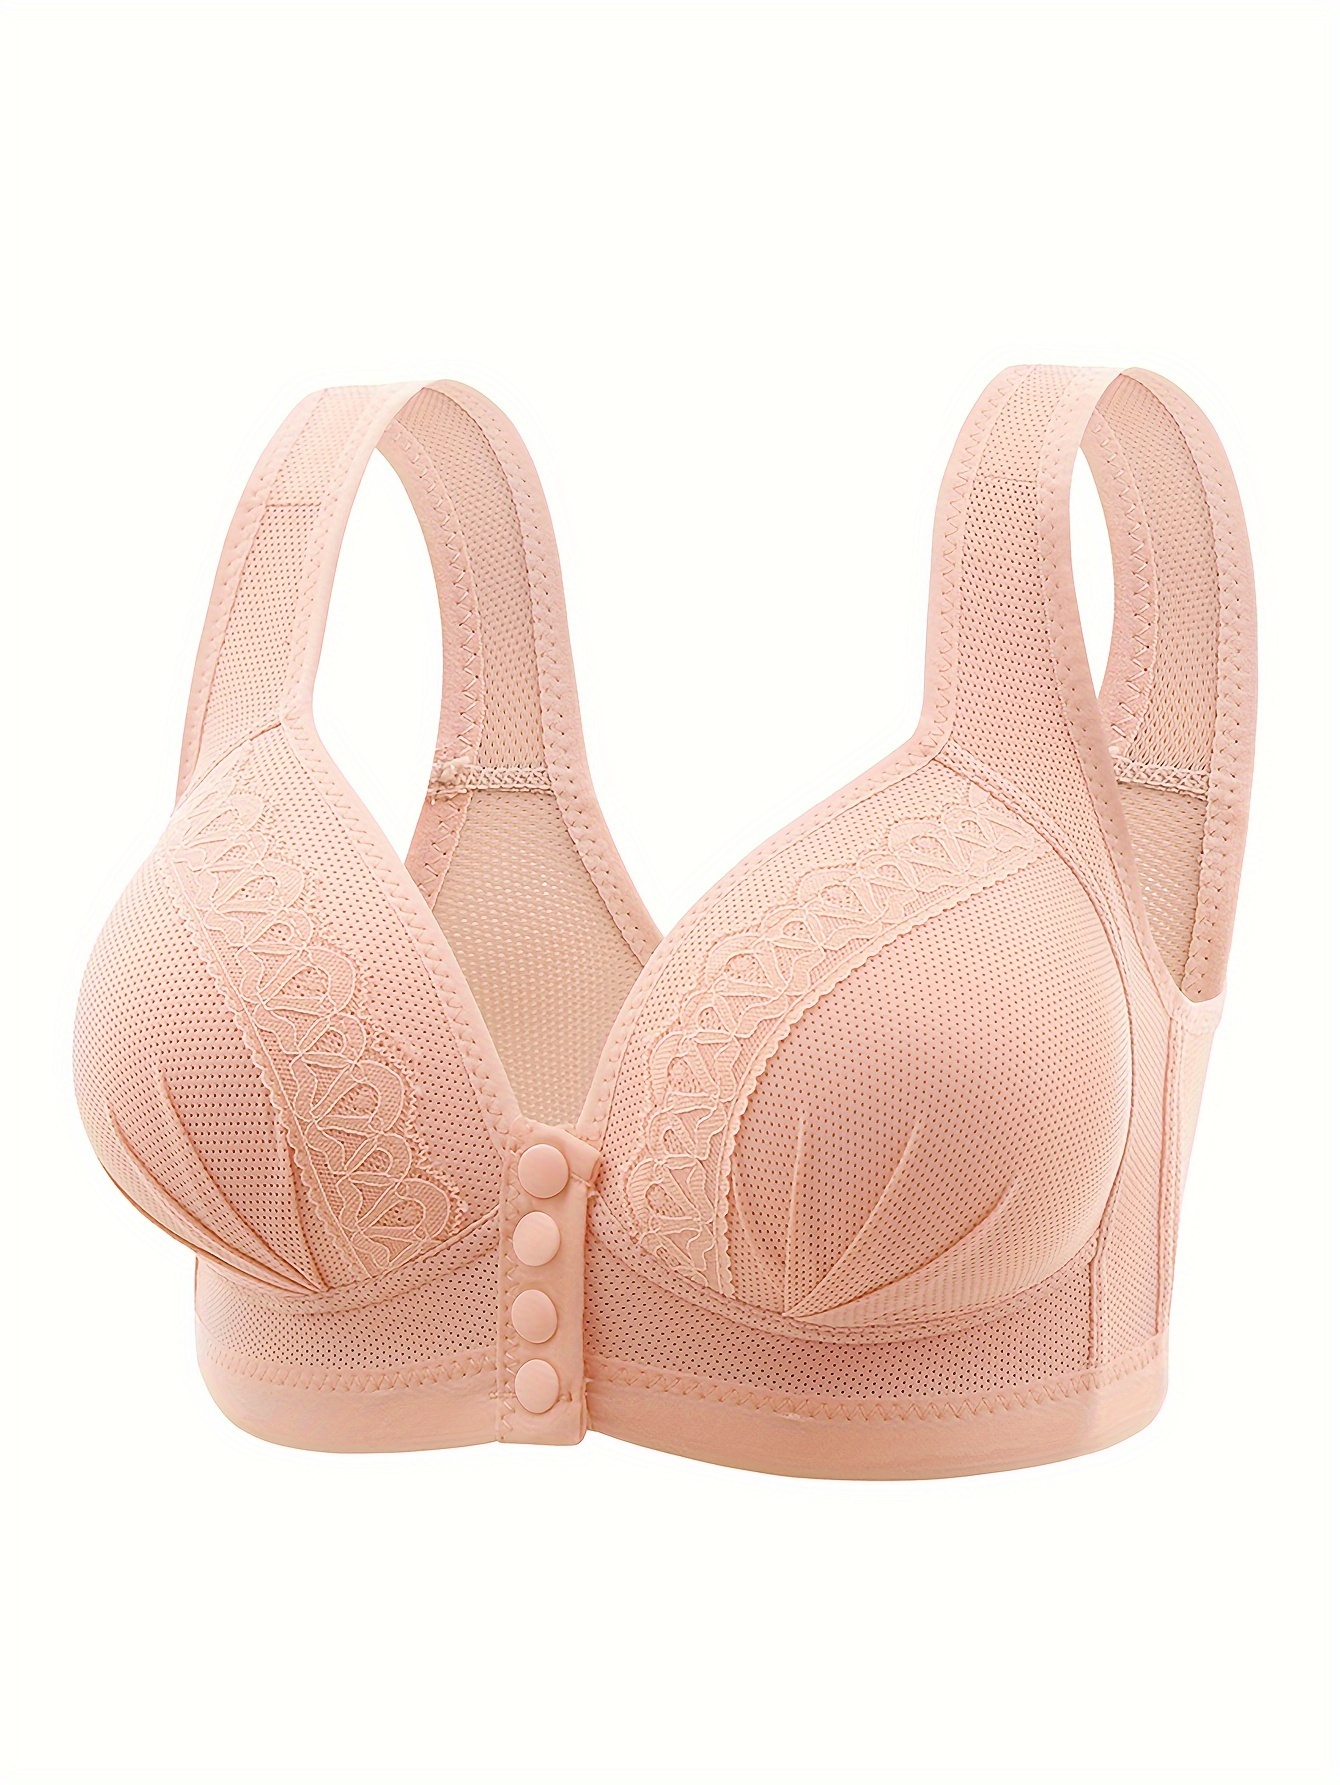 Bras for Women No Underwire Lace Sexy Lingerie Wireless Bra for